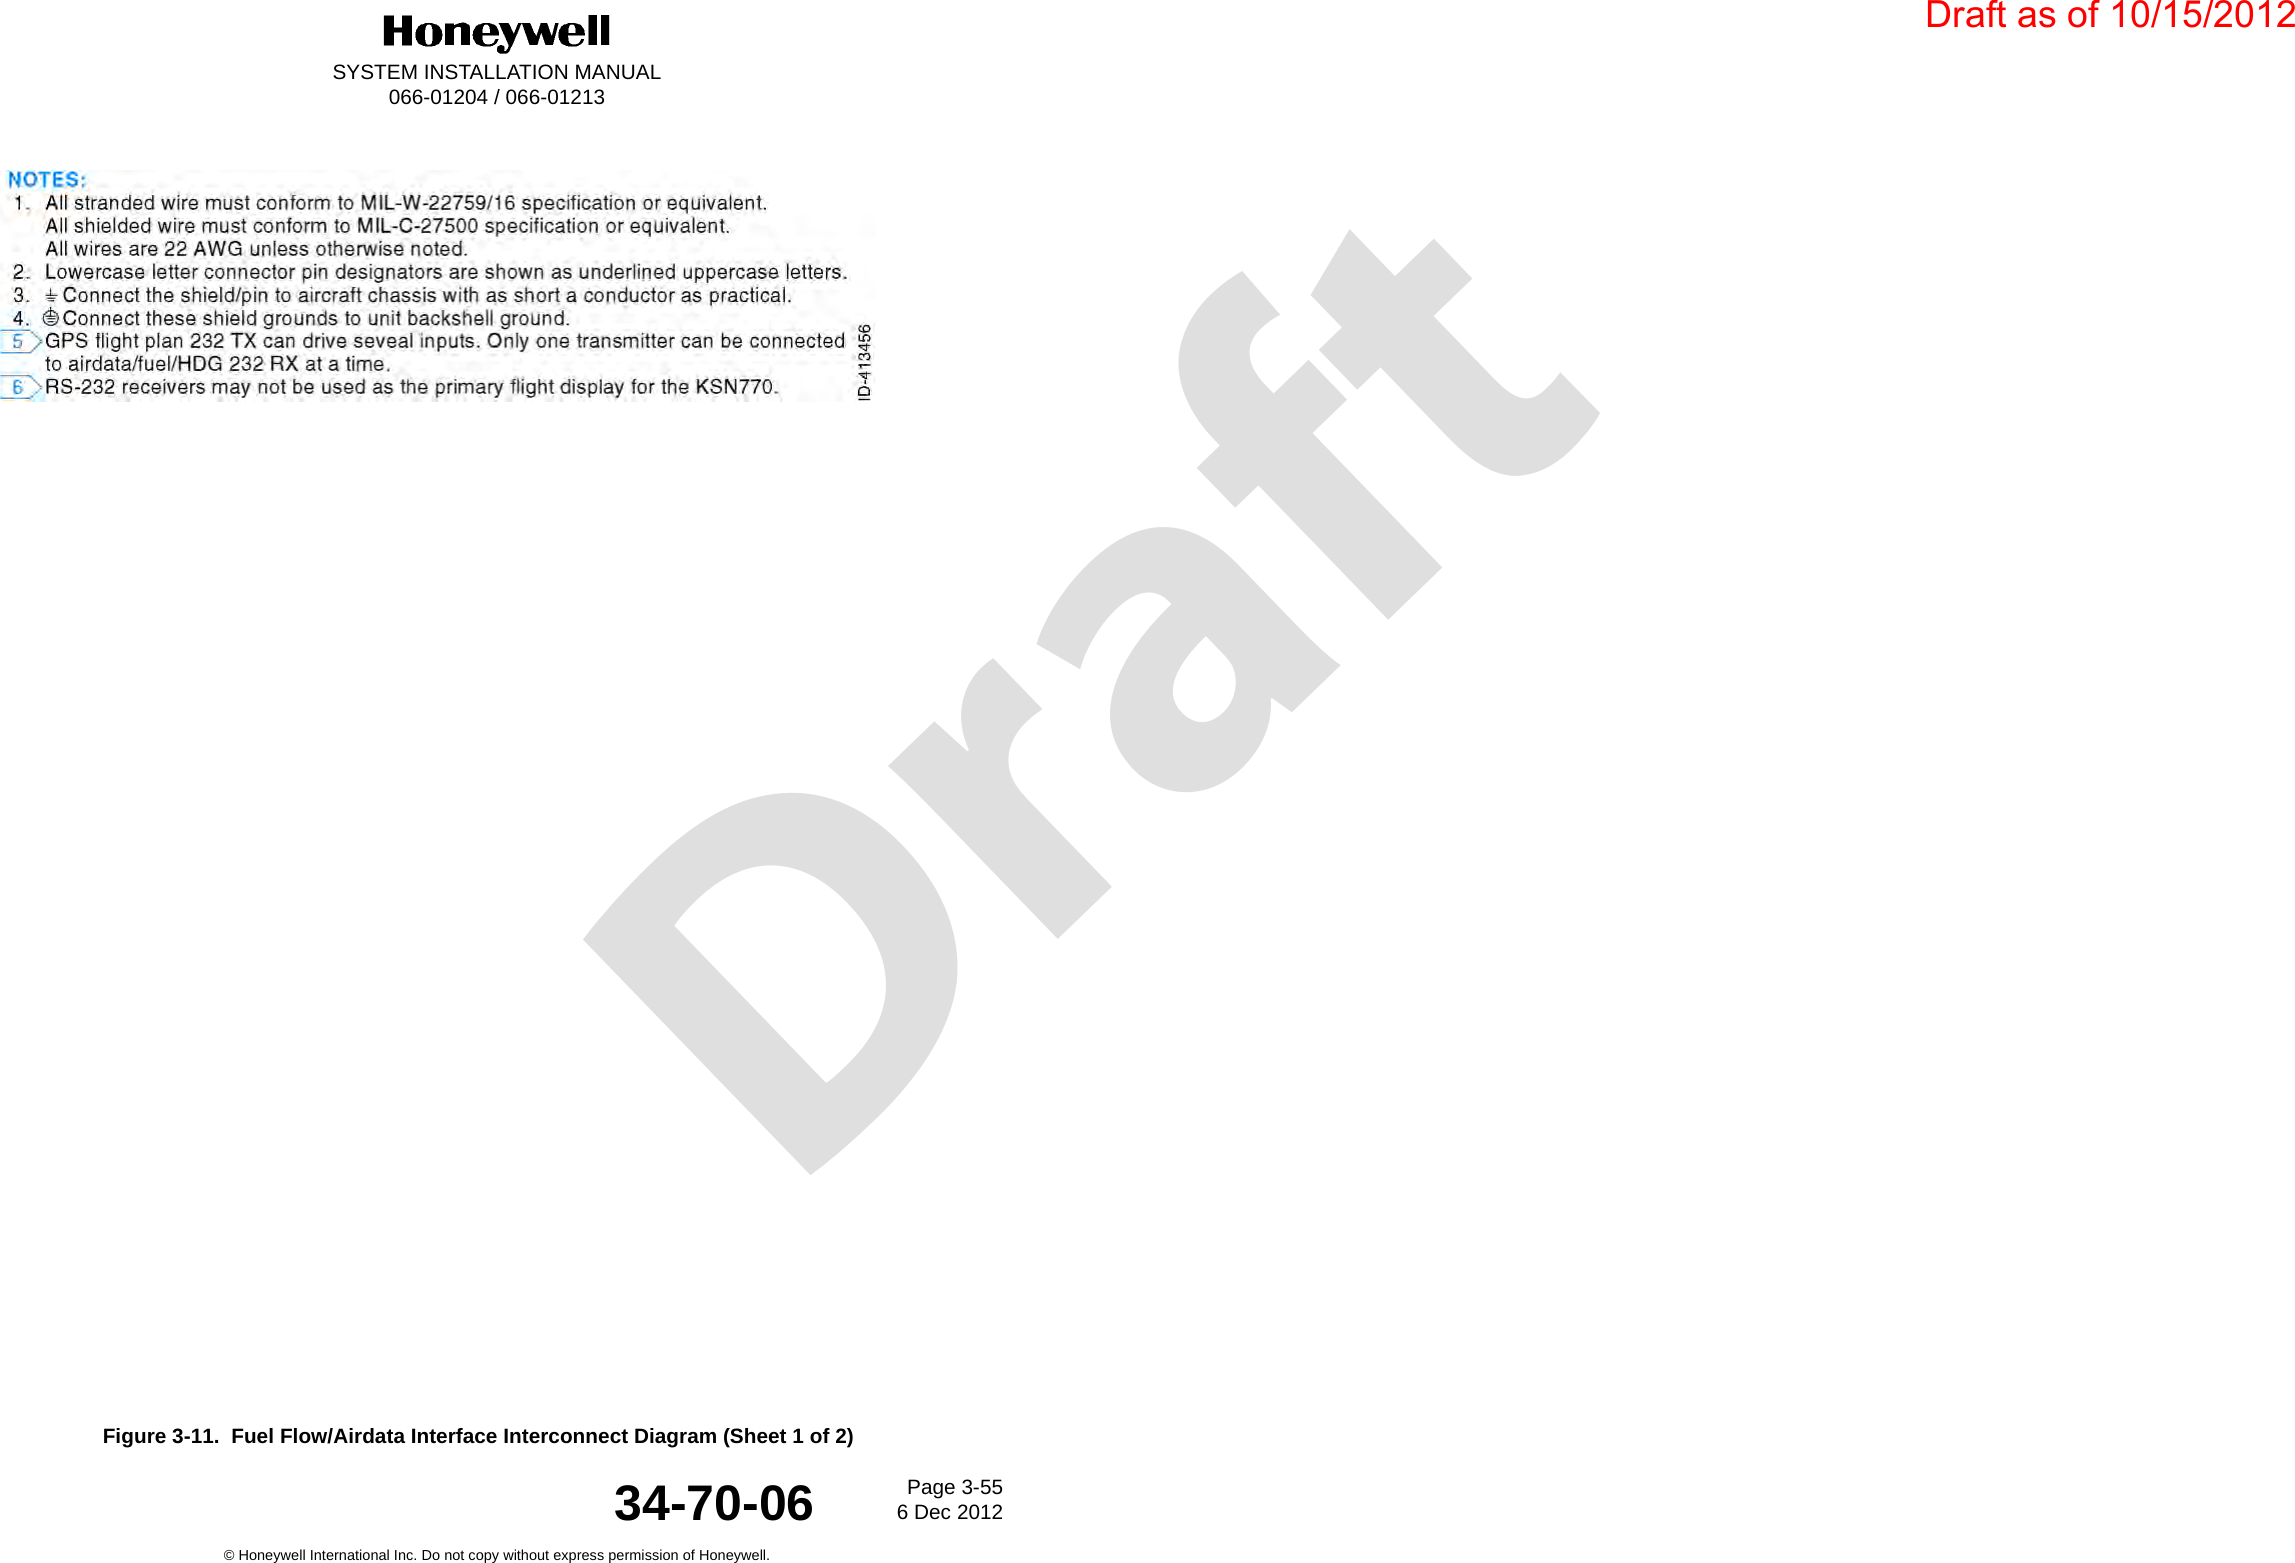 DraftSYSTEM INSTALLATION MANUAL066-01204 / 066-01213Page 3-556 Dec 2012© Honeywell International Inc. Do not copy without express permission of Honeywell.34-70-06Figure 3-11.  Fuel Flow/Airdata Interface Interconnect Diagram (Sheet 1 of 2)Draft as of 10/15/2012